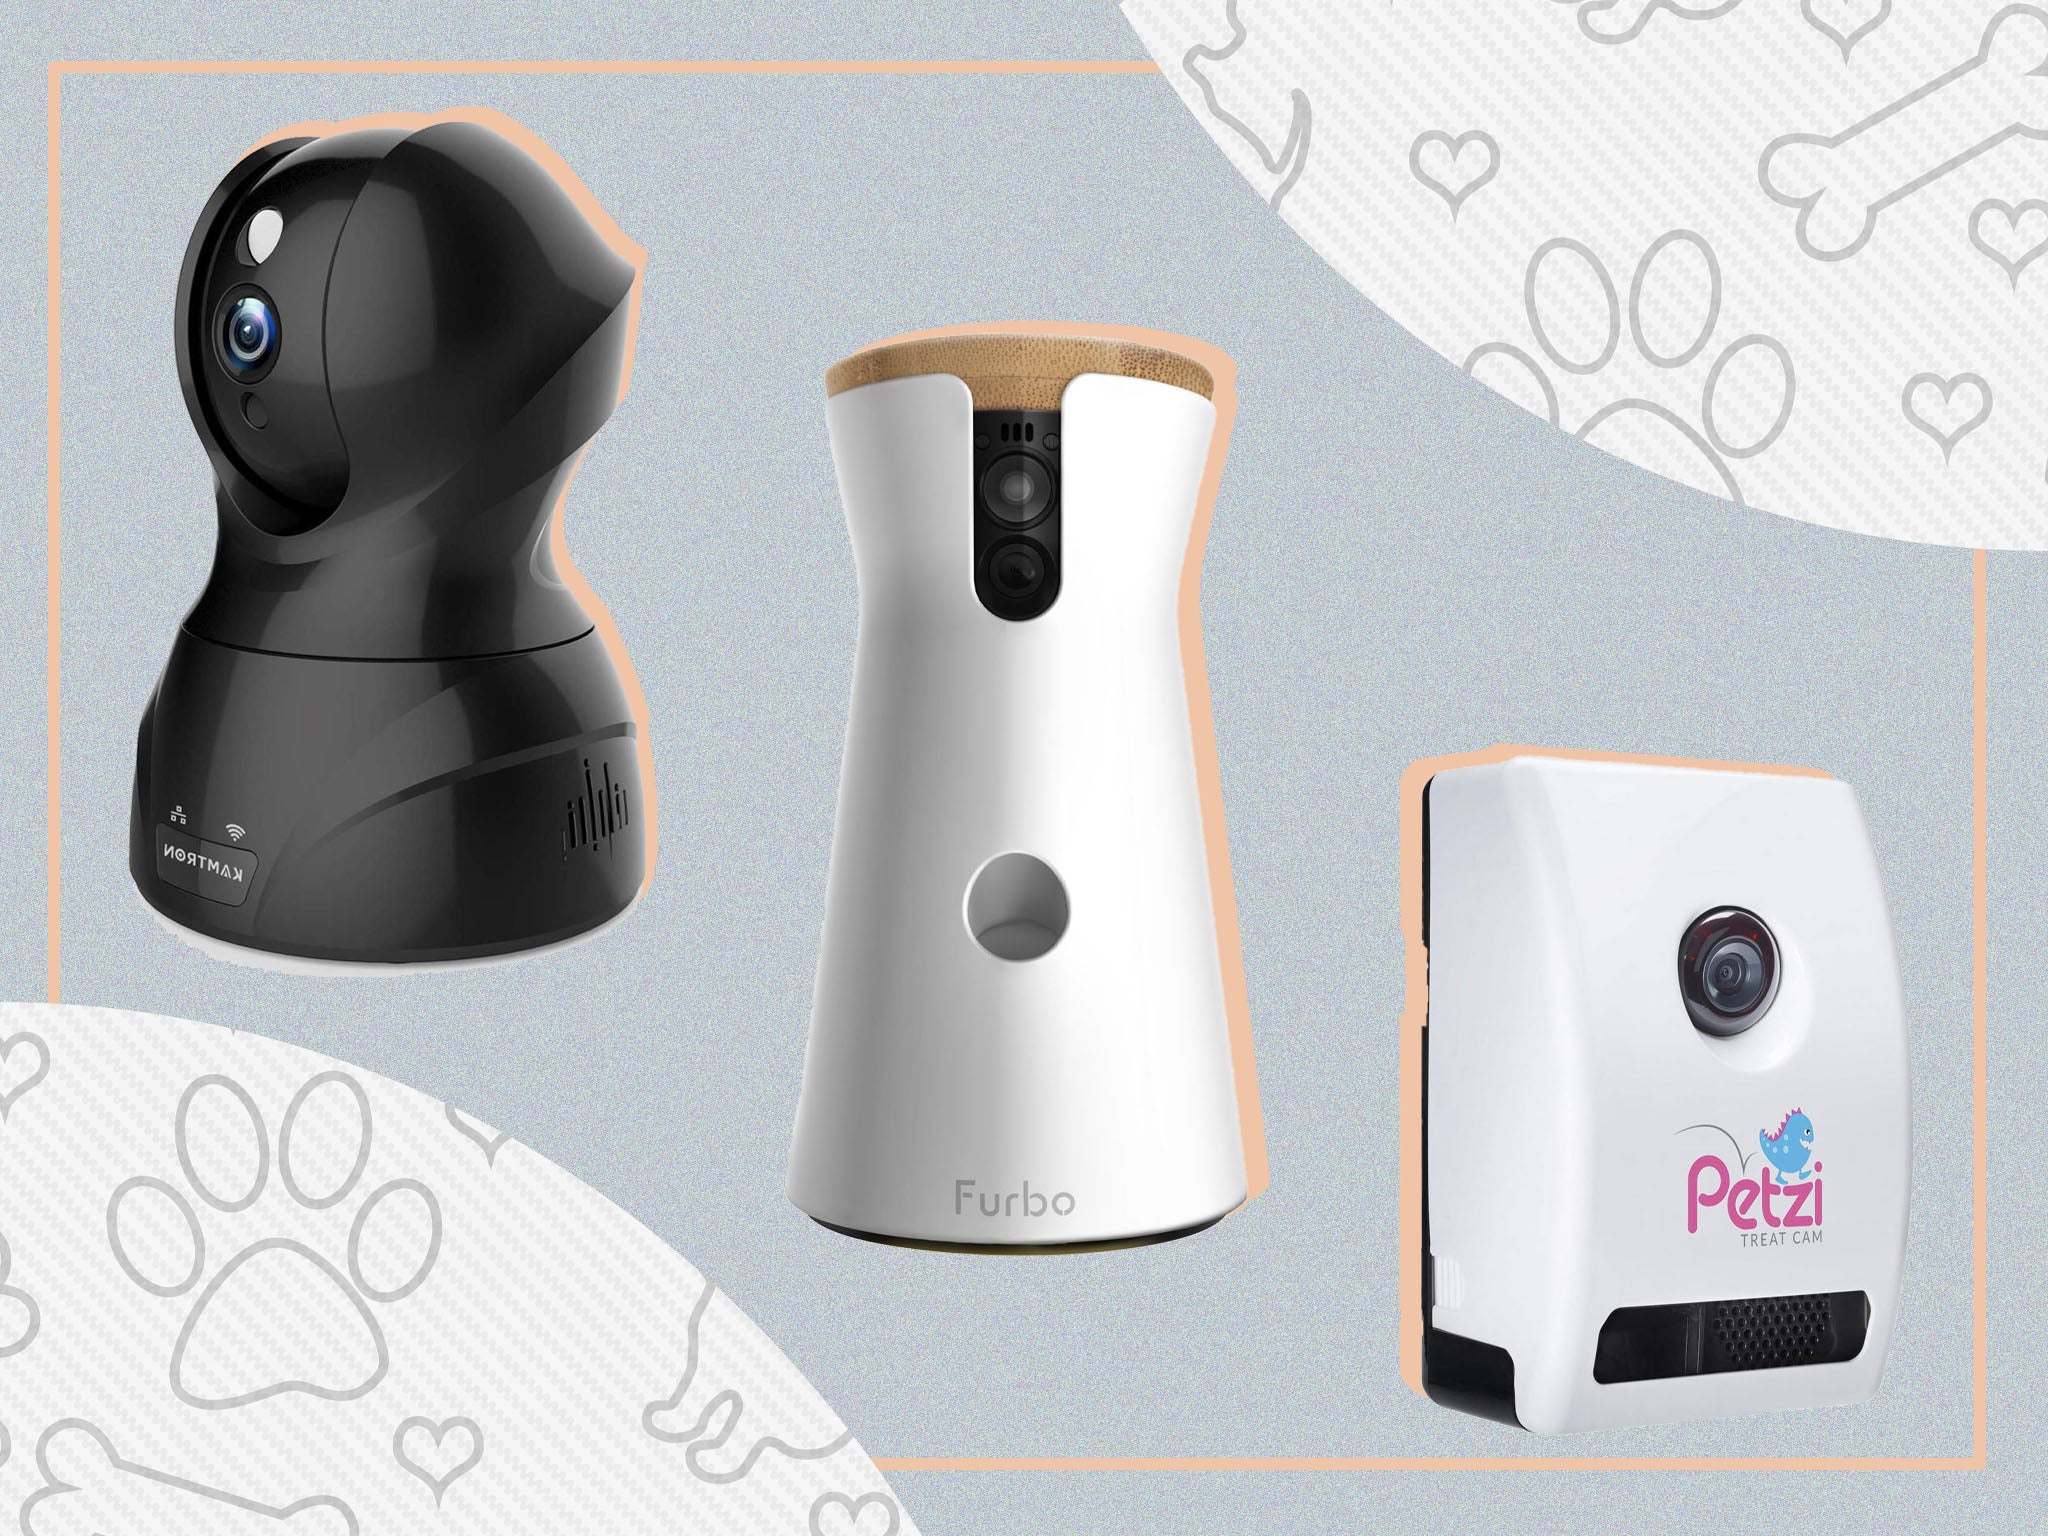 7 best pet cameras that dispense treats, send alerts and protect your furry friend